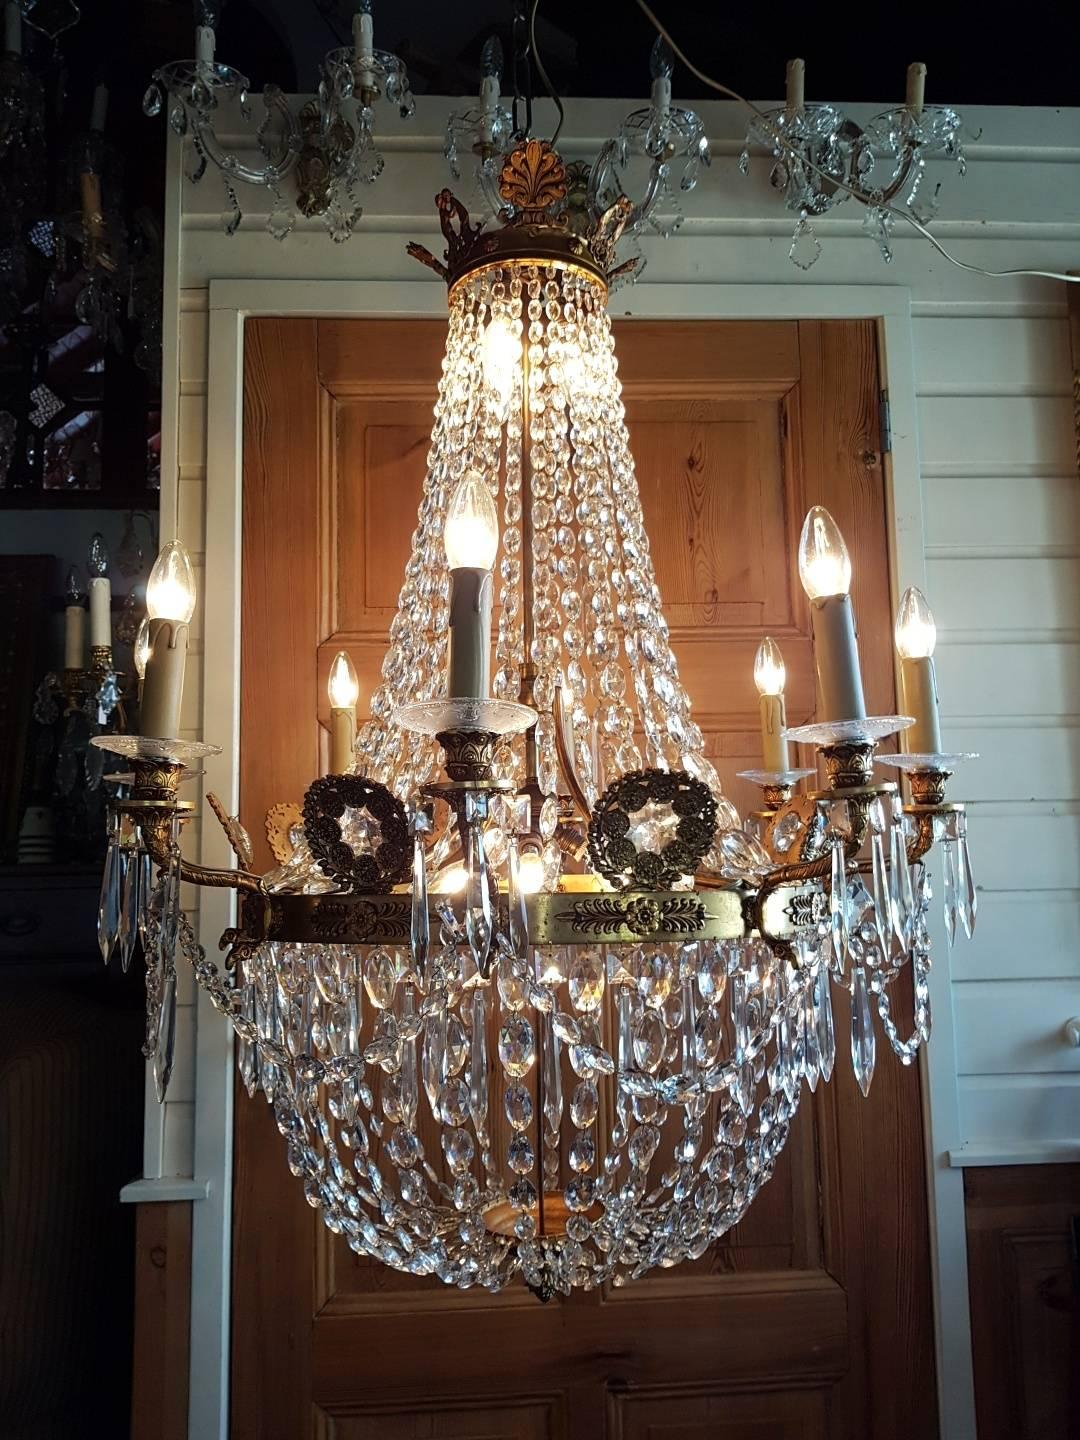 Beautiful empire bronze doré chandelier with hanging strings with oval crystal drops. 15-light crystal chandelier. Eight-lights at the ring, four at the bottom and three at the top beautiful bronze arms and ornaments connected to the middle ring and